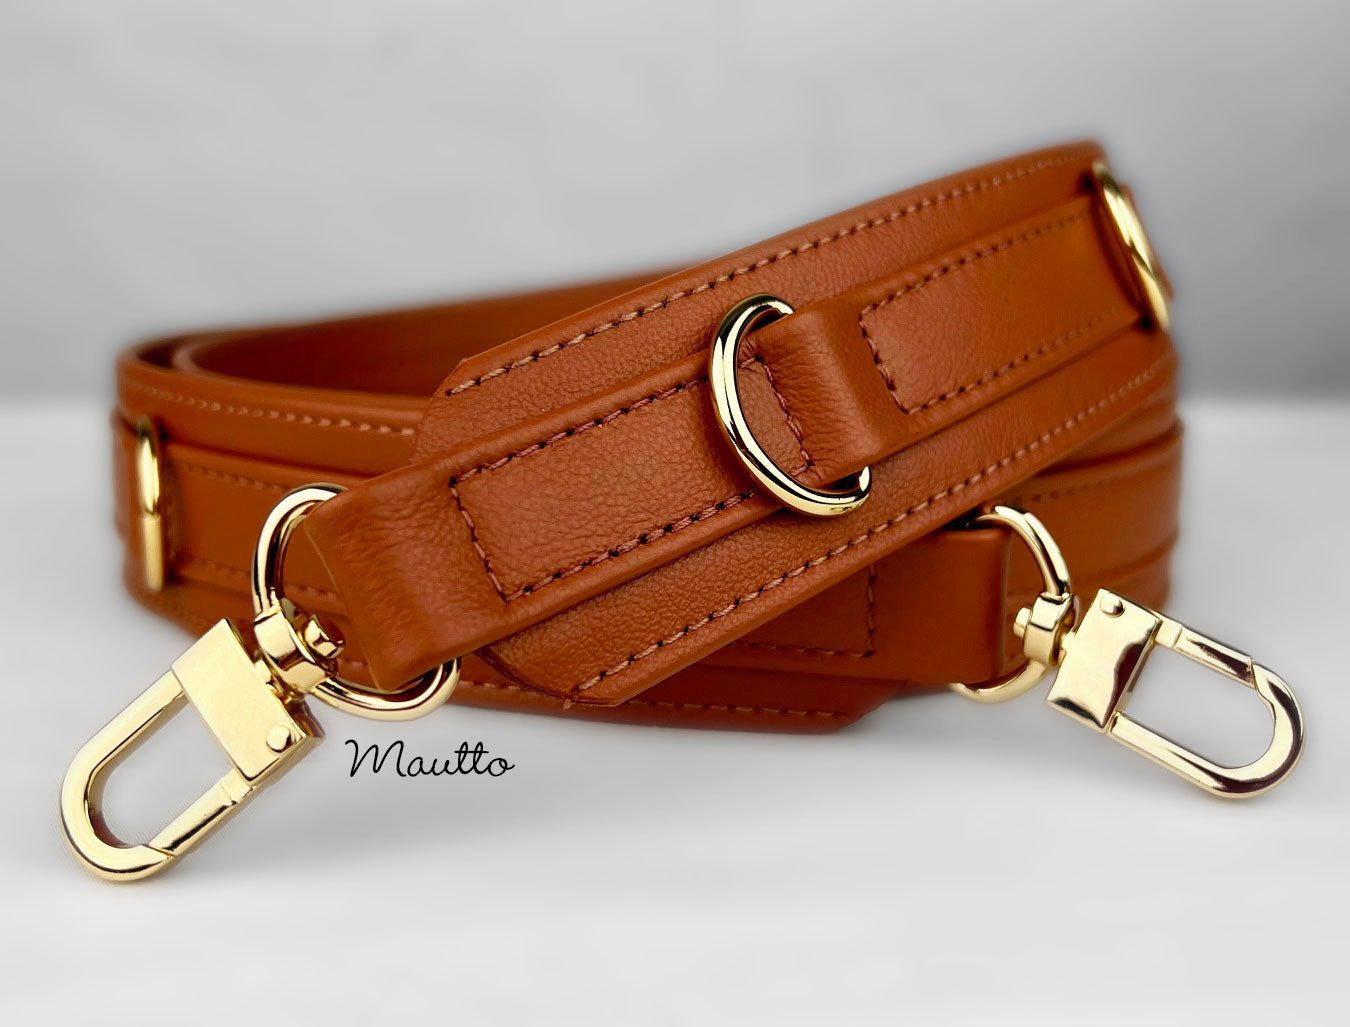 Customized leather strap to customer specifications.